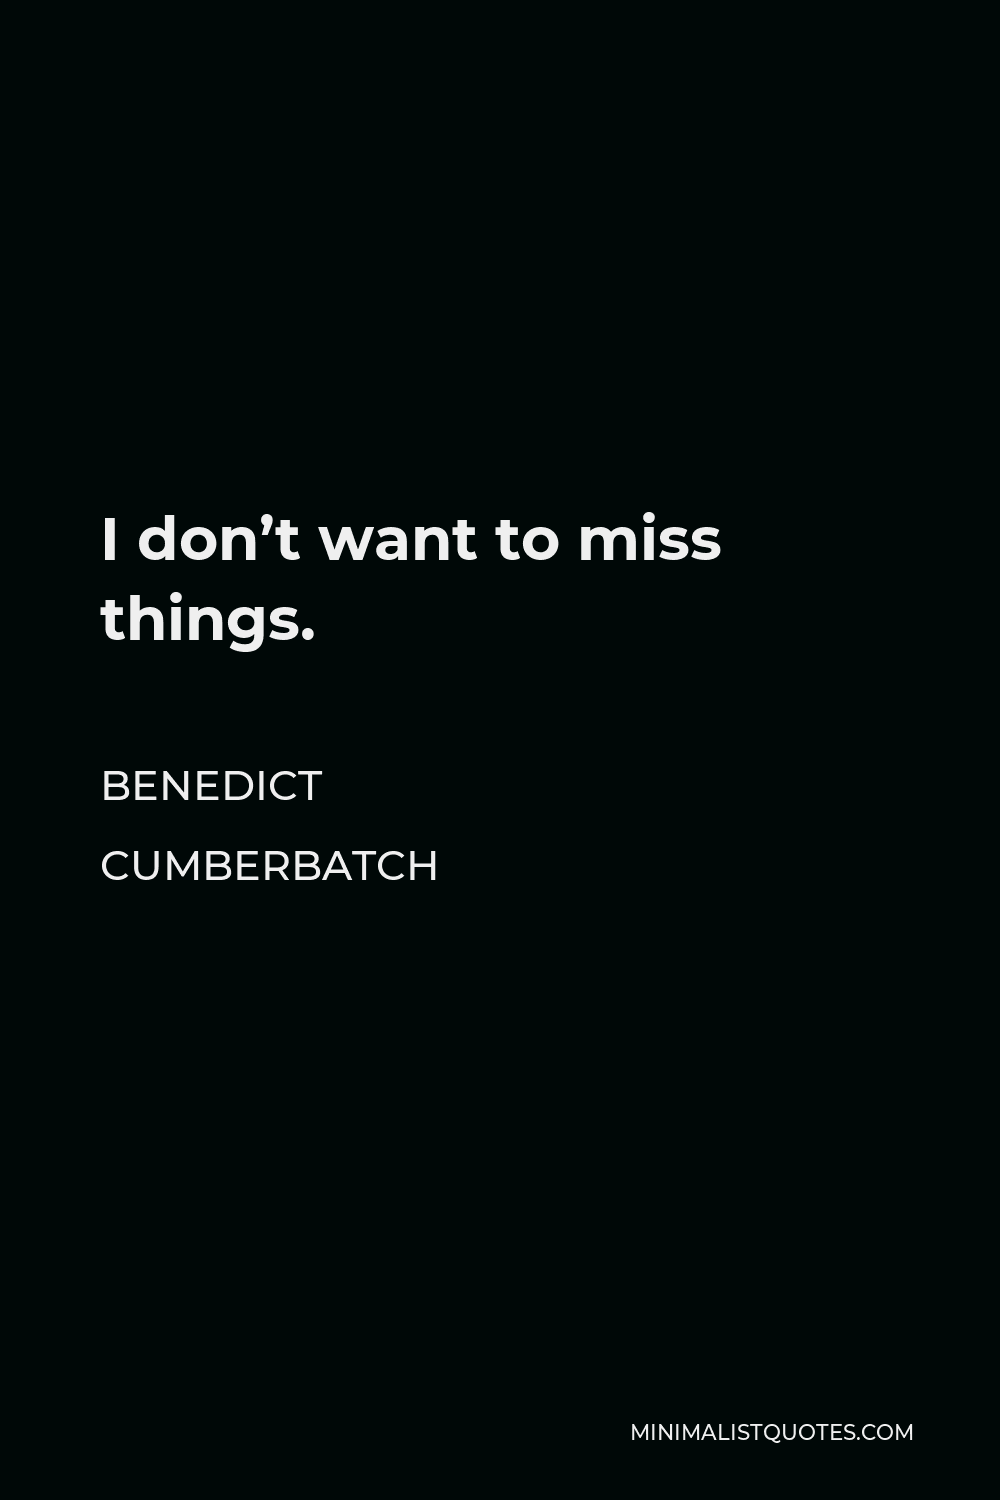 Benedict Cumberbatch Quote - I don’t want to miss things.